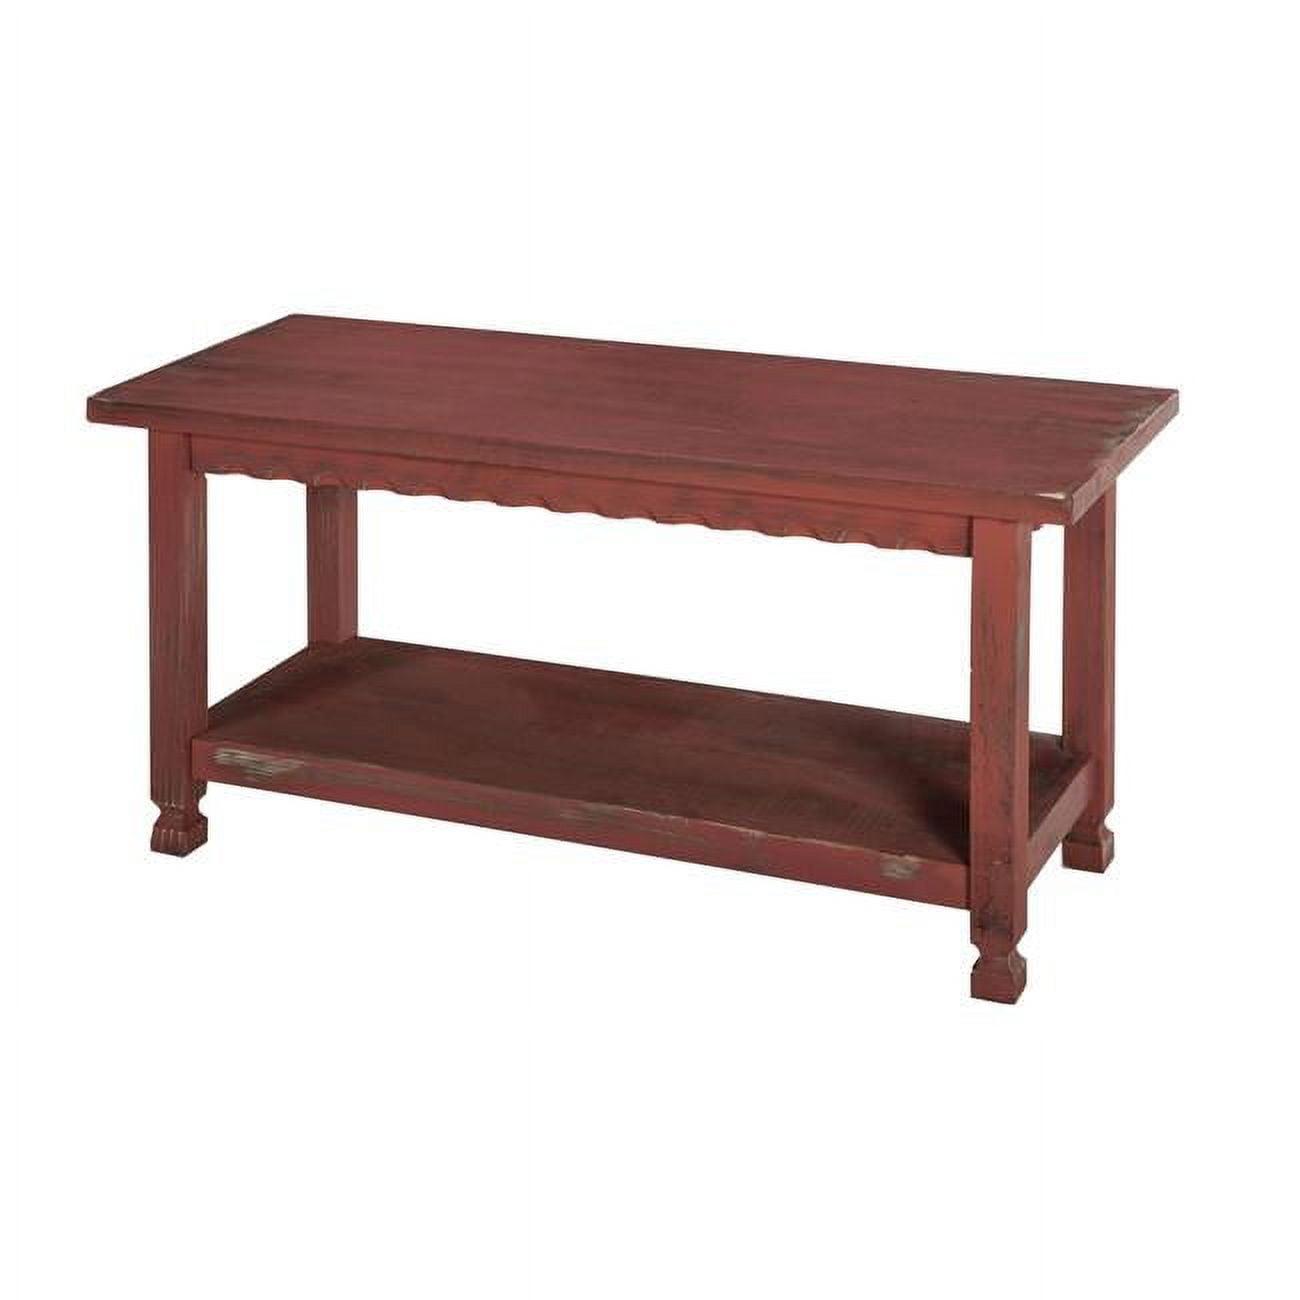 Antique Red Distressed Cottage Bench with Storage Shelf